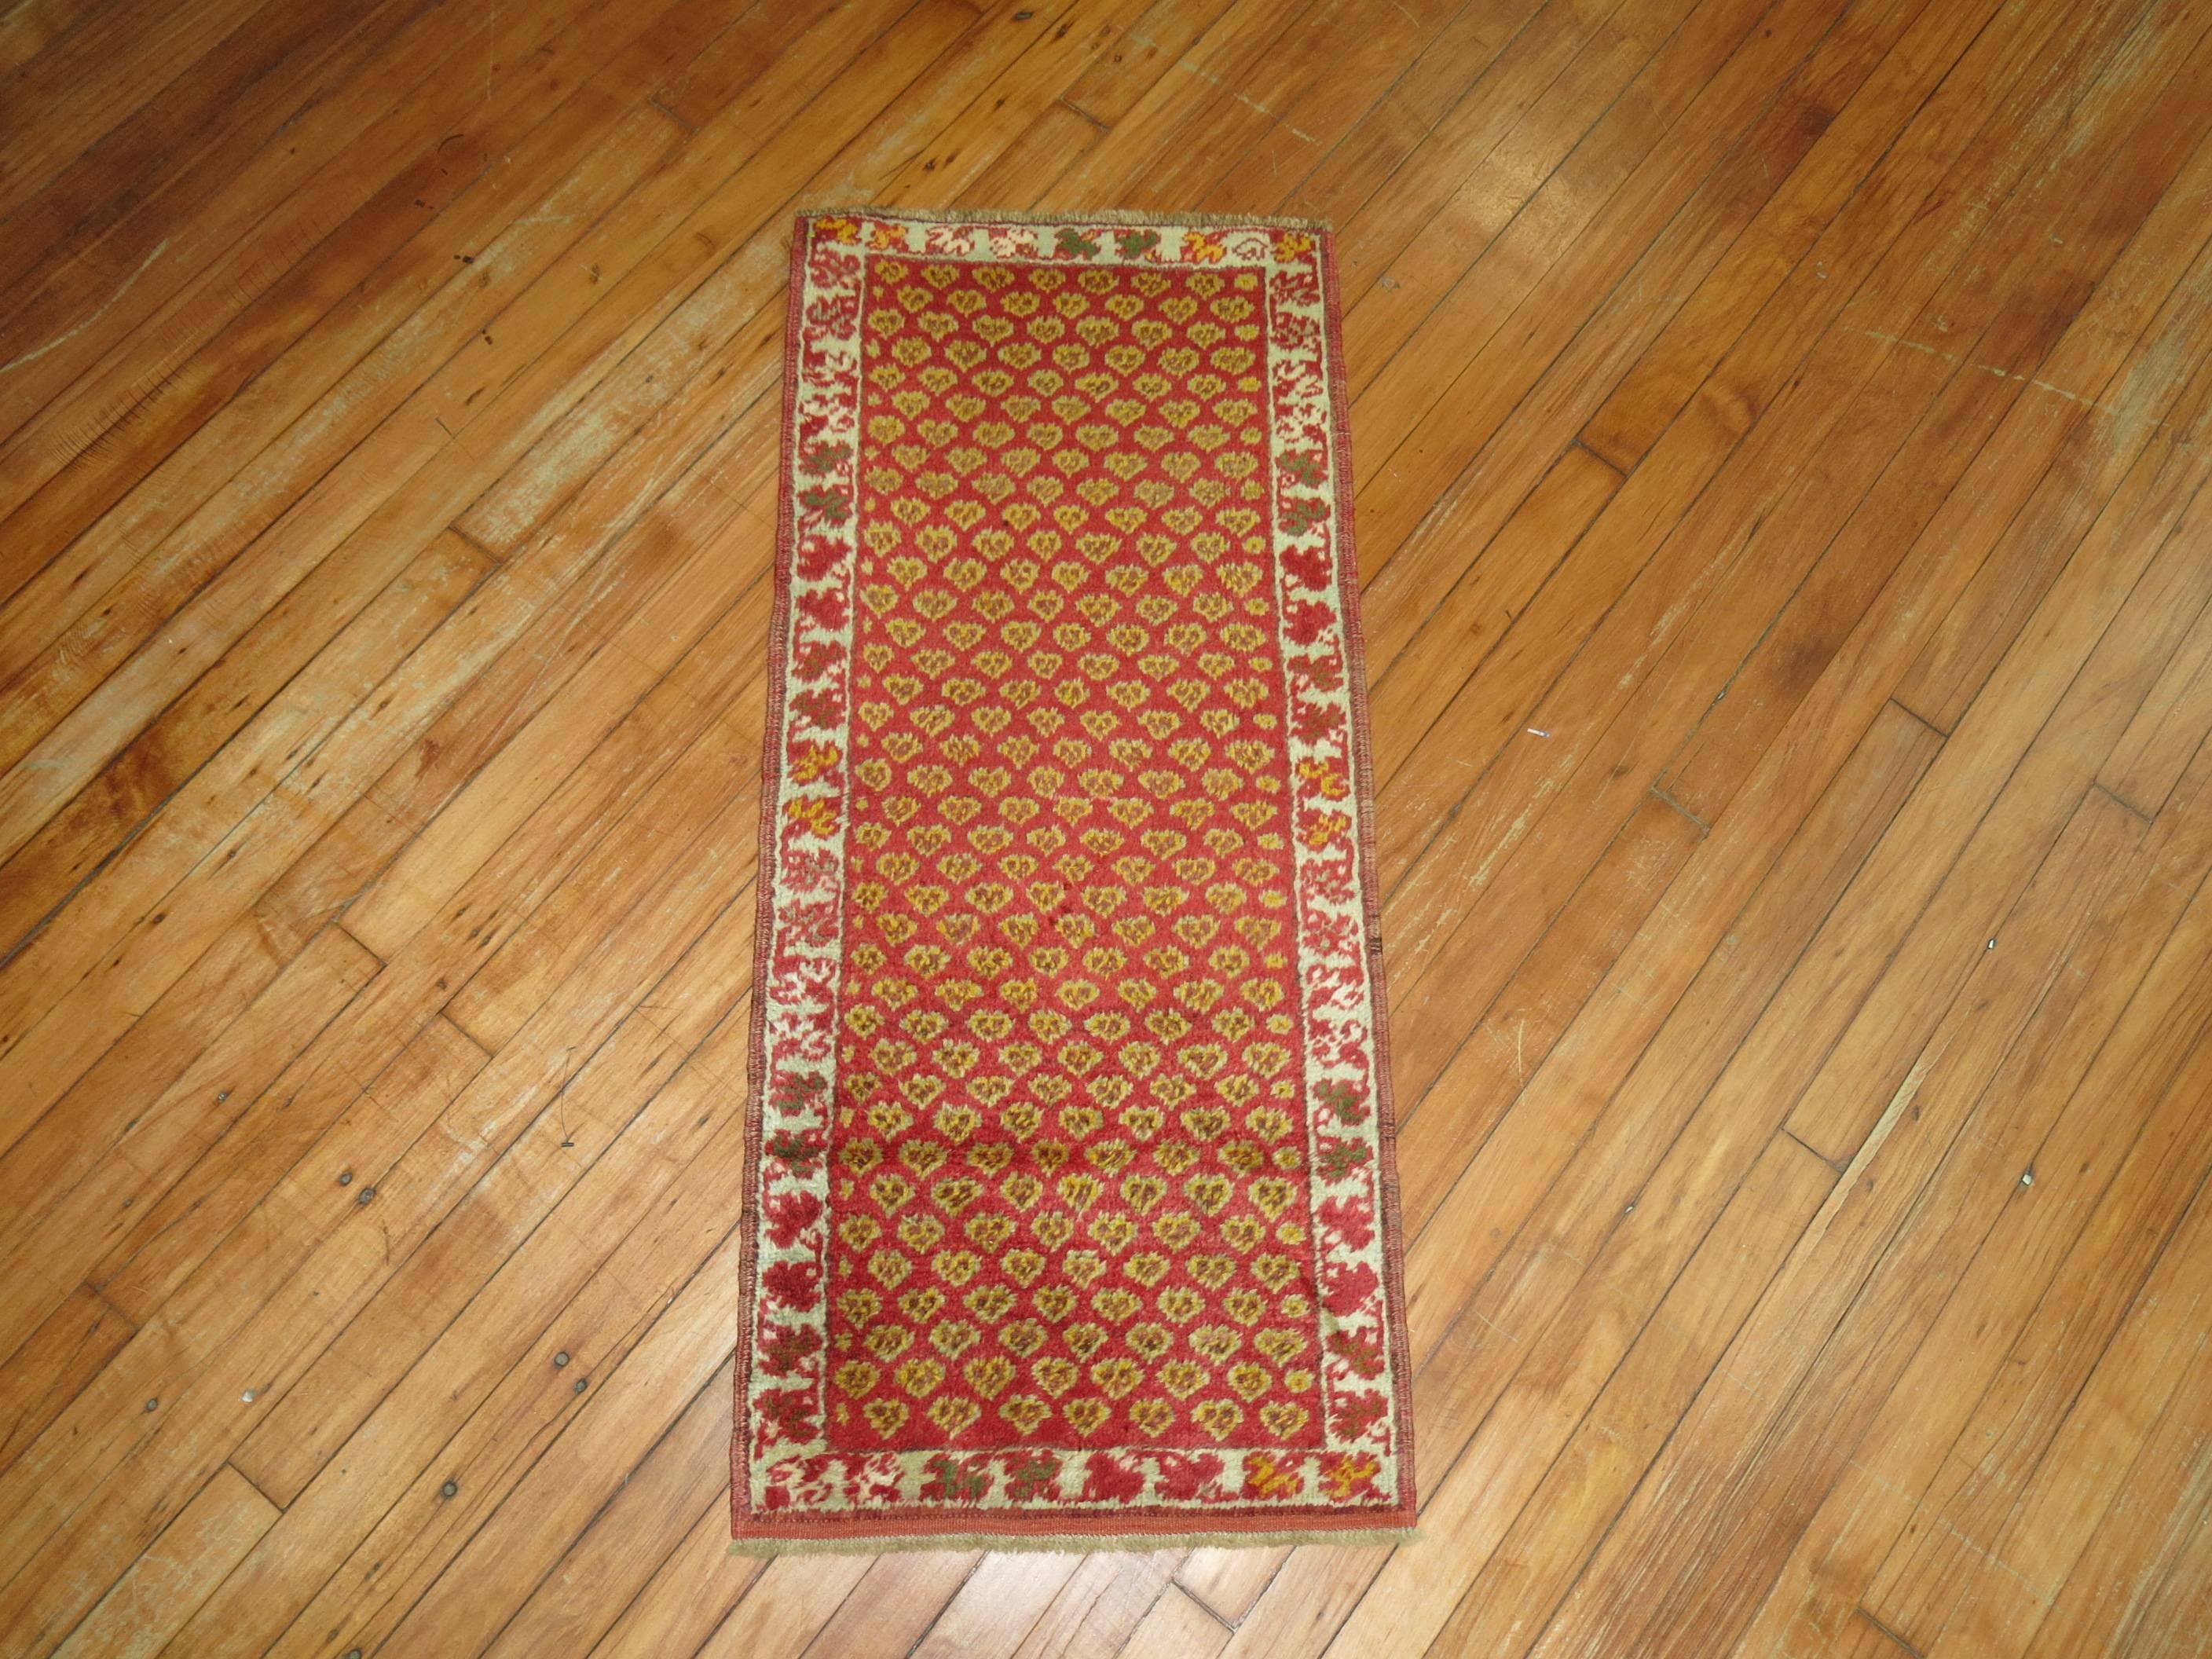 Hand-Woven Red Small Size Antique Turkish Rug